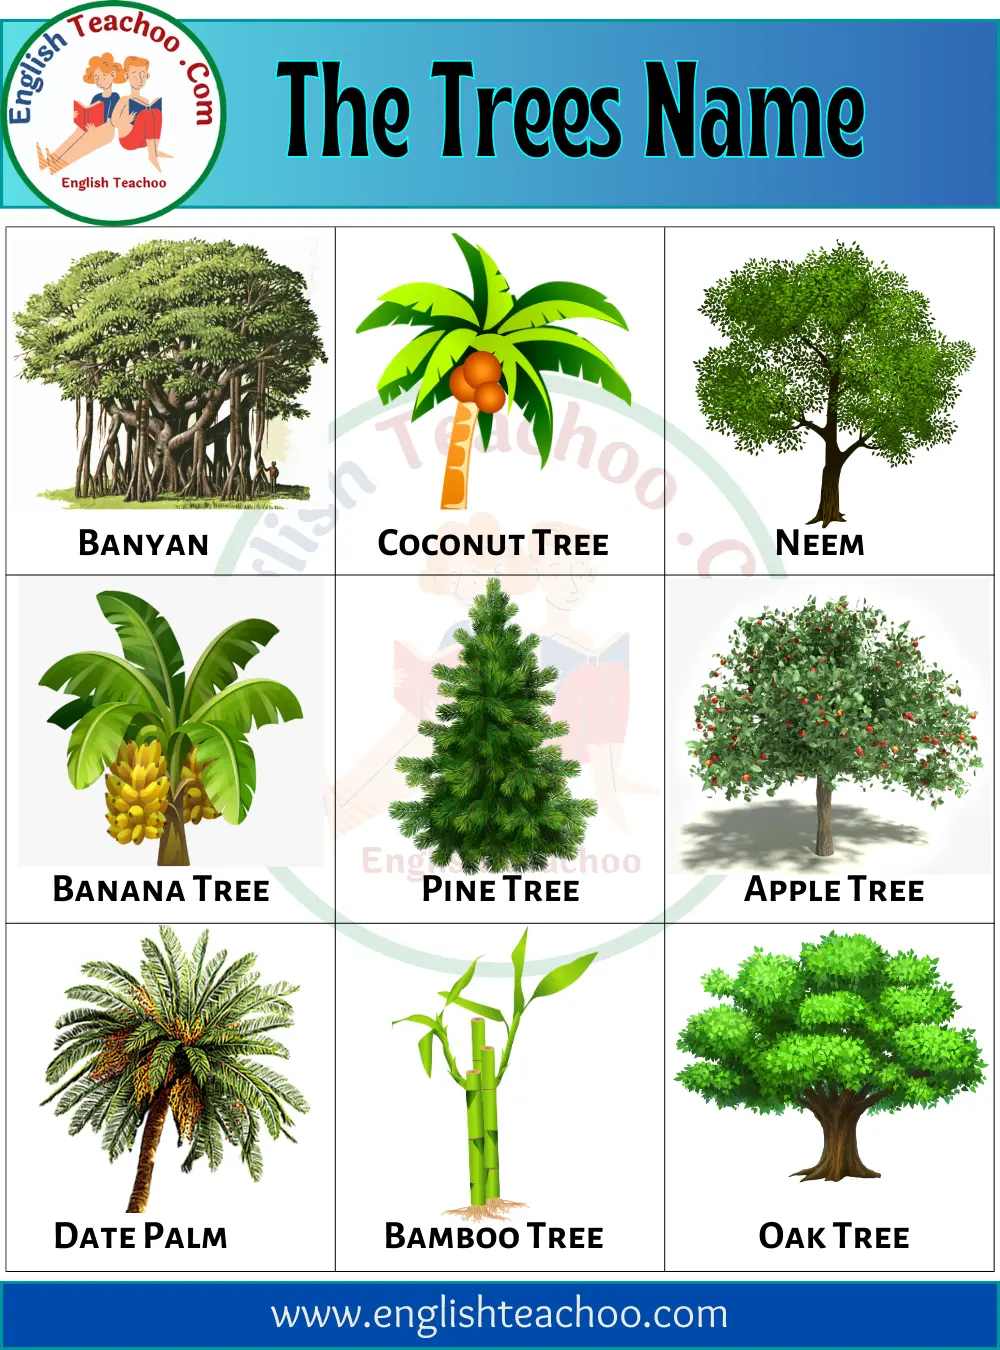 The Trees Names.webp